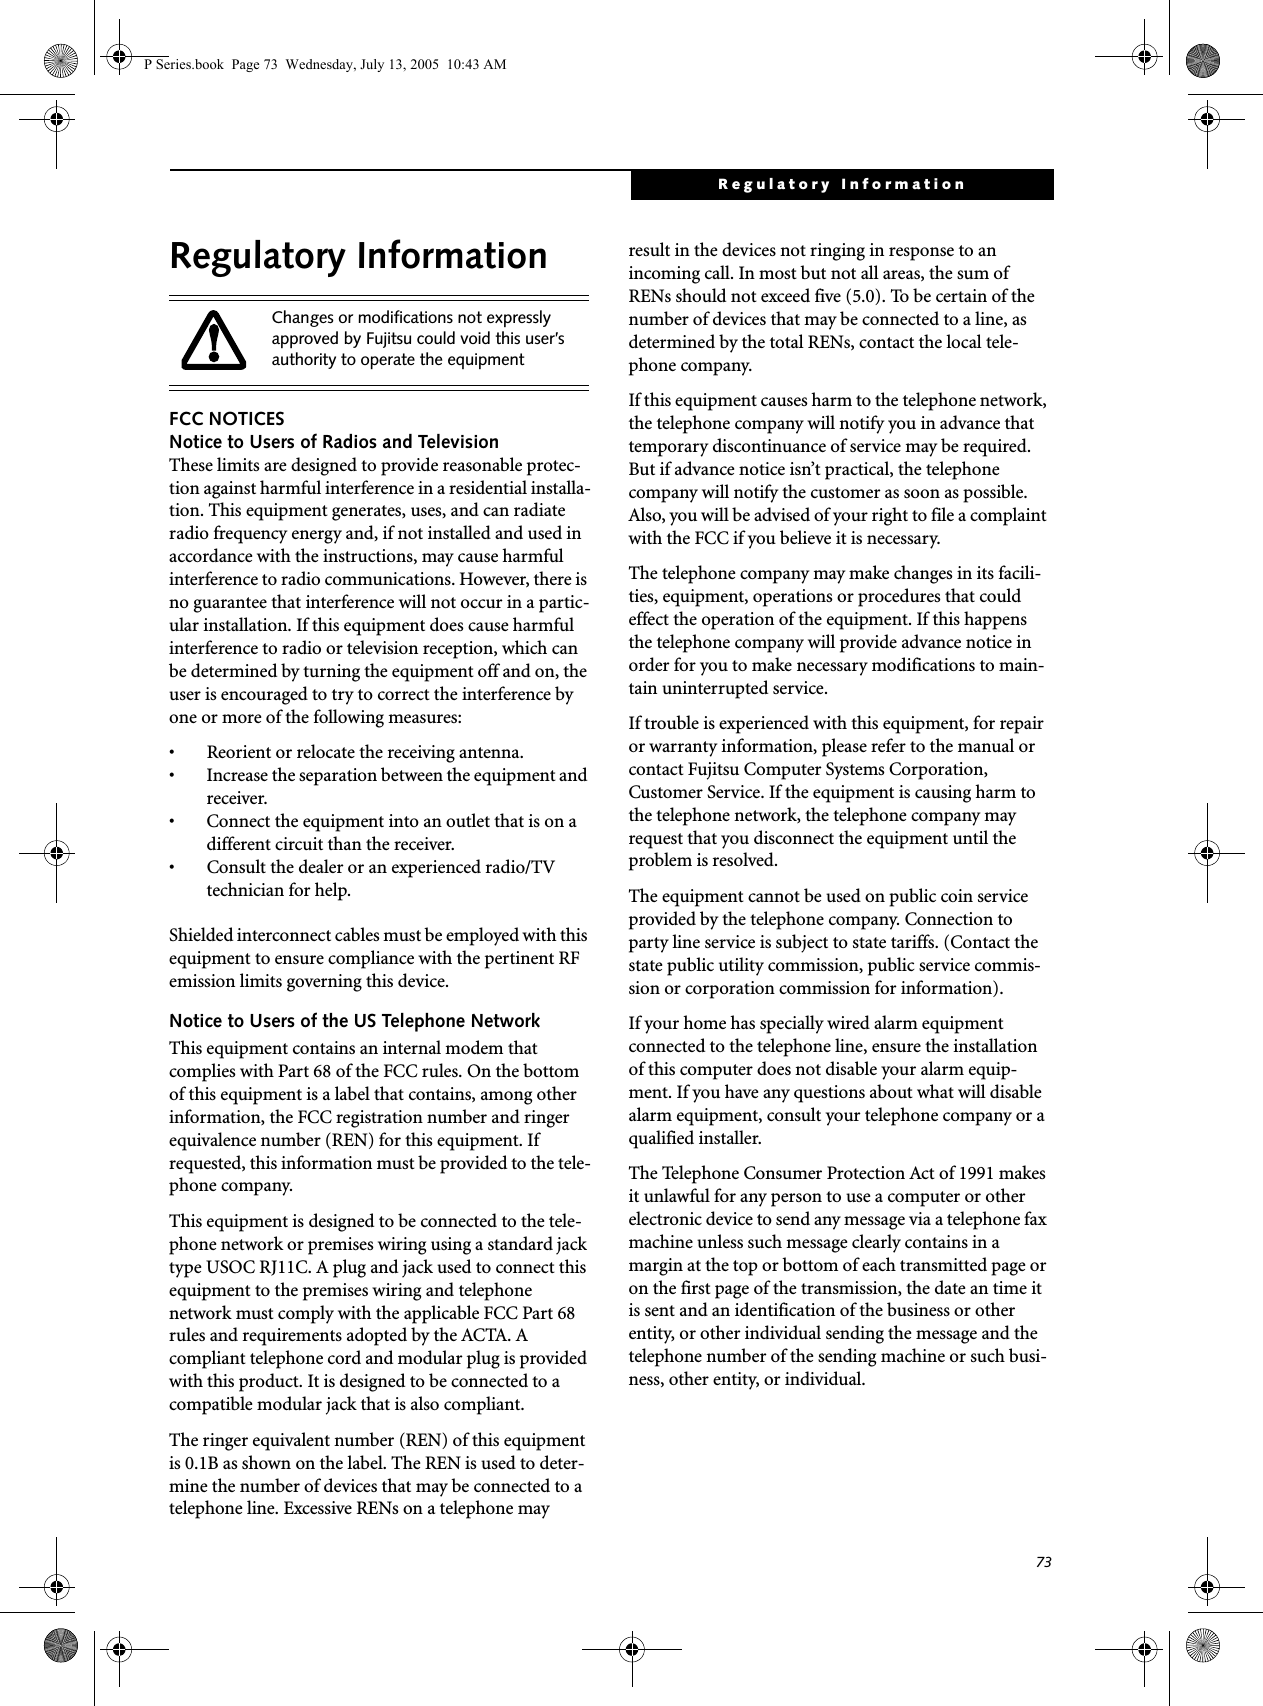 73Regulatory InformationRegulatory InformationFCC NOTICESNotice to Users of Radios and TelevisionThese limits are designed to provide reasonable protec-tion against harmful interference in a residential installa-tion. This equipment generates, uses, and can radiate radio frequency energy and, if not installed and used in accordance with the instructions, may cause harmful interference to radio communications. However, there is no guarantee that interference will not occur in a partic-ular installation. If this equipment does cause harmful interference to radio or television reception, which can be determined by turning the equipment off and on, the user is encouraged to try to correct the interference by one or more of the following measures:• Reorient or relocate the receiving antenna.• Increase the separation between the equipment and receiver.• Connect the equipment into an outlet that is on a different circuit than the receiver.• Consult the dealer or an experienced radio/TVtechnician for help.Shielded interconnect cables must be employed with this equipment to ensure compliance with the pertinent RF emission limits governing this device. Notice to Users of the US Telephone NetworkThis equipment contains an internal modem that complies with Part 68 of the FCC rules. On the bottom of this equipment is a label that contains, among other information, the FCC registration number and ringer equivalence number (REN) for this equipment. If requested, this information must be provided to the tele-phone company.This equipment is designed to be connected to the tele-phone network or premises wiring using a standard jack type USOC RJ11C. A plug and jack used to connect this equipment to the premises wiring and telephone network must comply with the applicable FCC Part 68 rules and requirements adopted by the ACTA. A compliant telephone cord and modular plug is provided with this product. It is designed to be connected to a compatible modular jack that is also compliant.The ringer equivalent number (REN) of this equipment is 0.1B as shown on the label. The REN is used to deter-mine the number of devices that may be connected to a telephone line. Excessive RENs on a telephone may result in the devices not ringing in response to an incoming call. In most but not all areas, the sum of RENs should not exceed five (5.0). To be certain of the number of devices that may be connected to a line, as determined by the total RENs, contact the local tele-phone company. If this equipment causes harm to the telephone network, the telephone company will notify you in advance that temporary discontinuance of service may be required. But if advance notice isn’t practical, the telephone company will notify the customer as soon as possible. Also, you will be advised of your right to file a complaint with the FCC if you believe it is necessary.The telephone company may make changes in its facili-ties, equipment, operations or procedures that could effect the operation of the equipment. If this happens the telephone company will provide advance notice in order for you to make necessary modifications to main-tain uninterrupted service. If trouble is experienced with this equipment, for repair or warranty information, please refer to the manual or contact Fujitsu Computer Systems Corporation, Customer Service. If the equipment is causing harm to the telephone network, the telephone company may request that you disconnect the equipment until the problem is resolved.The equipment cannot be used on public coin service provided by the telephone company. Connection to party line service is subject to state tariffs. (Contact the state public utility commission, public service commis-sion or corporation commission for information). If your home has specially wired alarm equipment connected to the telephone line, ensure the installation of this computer does not disable your alarm equip-ment. If you have any questions about what will disable alarm equipment, consult your telephone company or a qualified installer.The Telephone Consumer Protection Act of 1991 makes it unlawful for any person to use a computer or other electronic device to send any message via a telephone fax machine unless such message clearly contains in a margin at the top or bottom of each transmitted page or on the first page of the transmission, the date an time it is sent and an identification of the business or other entity, or other individual sending the message and the telephone number of the sending machine or such busi-ness, other entity, or individual.Changes or modifications not expressly approved by Fujitsu could void this user’s authority to operate the equipmentP Series.book  Page 73  Wednesday, July 13, 2005  10:43 AM